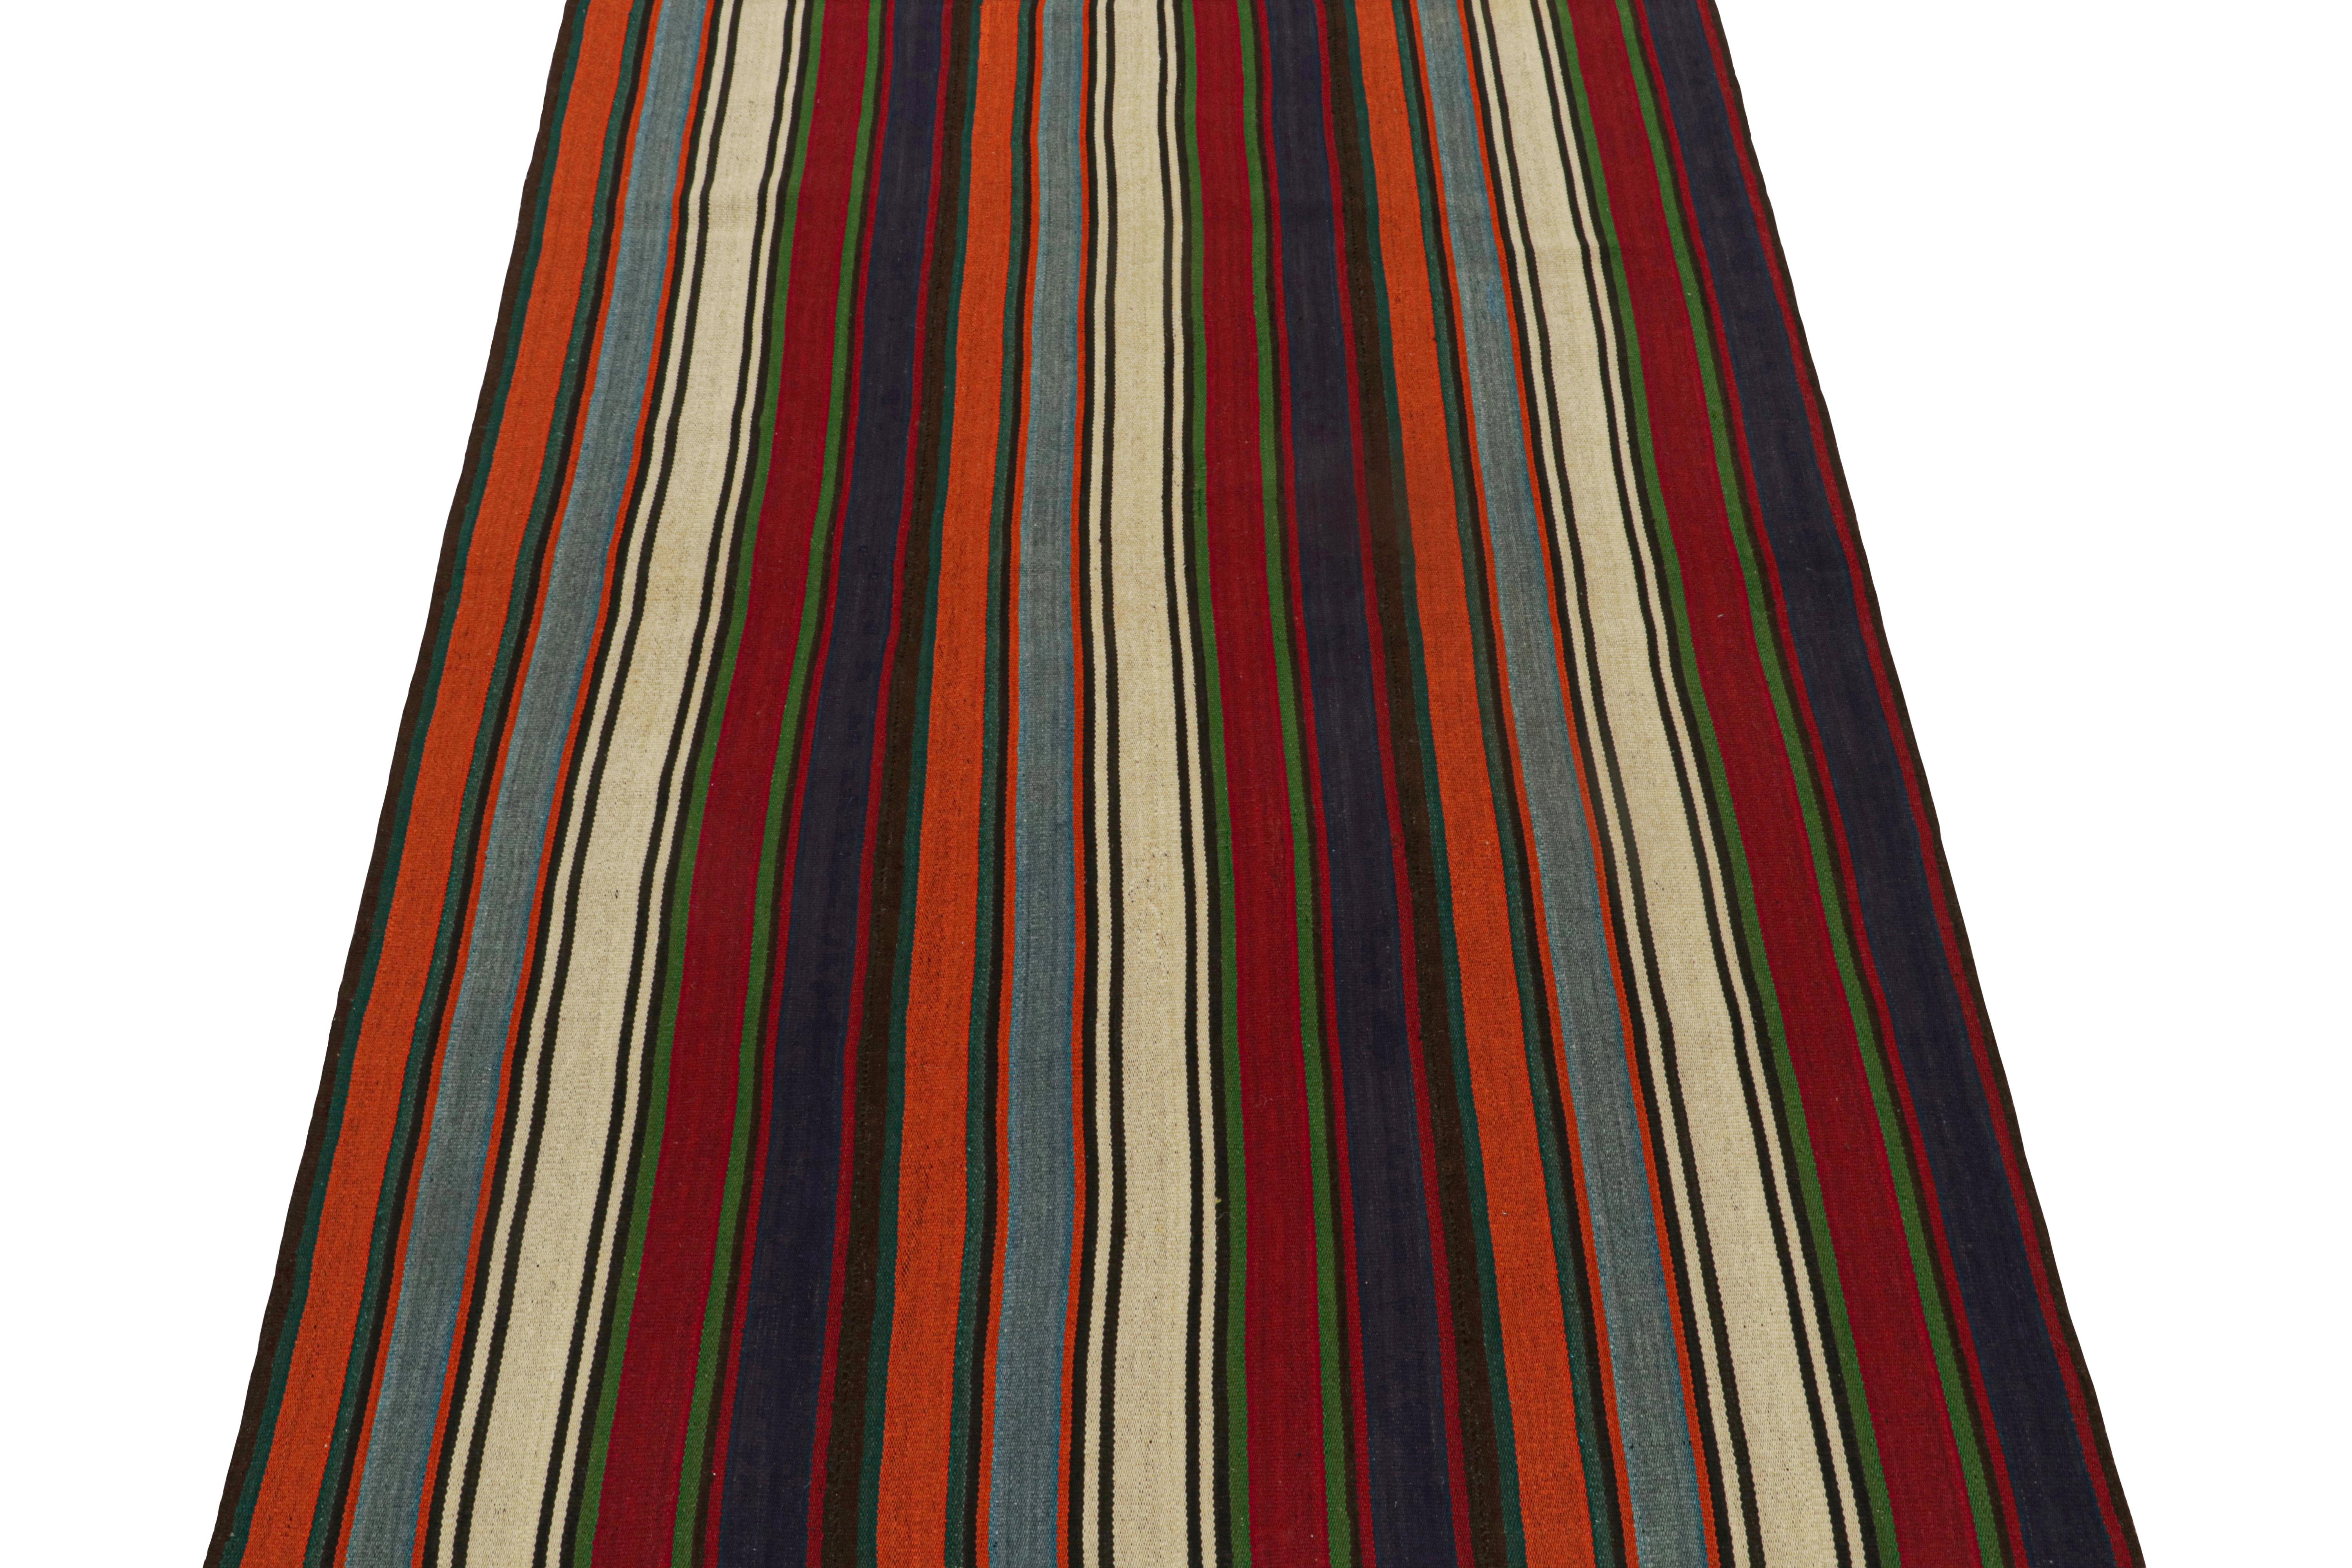 This vintage 5x8 Persian Kilim is a rare mid-century tribal rug, handwoven in wool circa 1950-1960. 

Its design most likely represents a Jajim-style Kilim–a flat-weaving technique in which multiple pieces are combined into one. This creates the